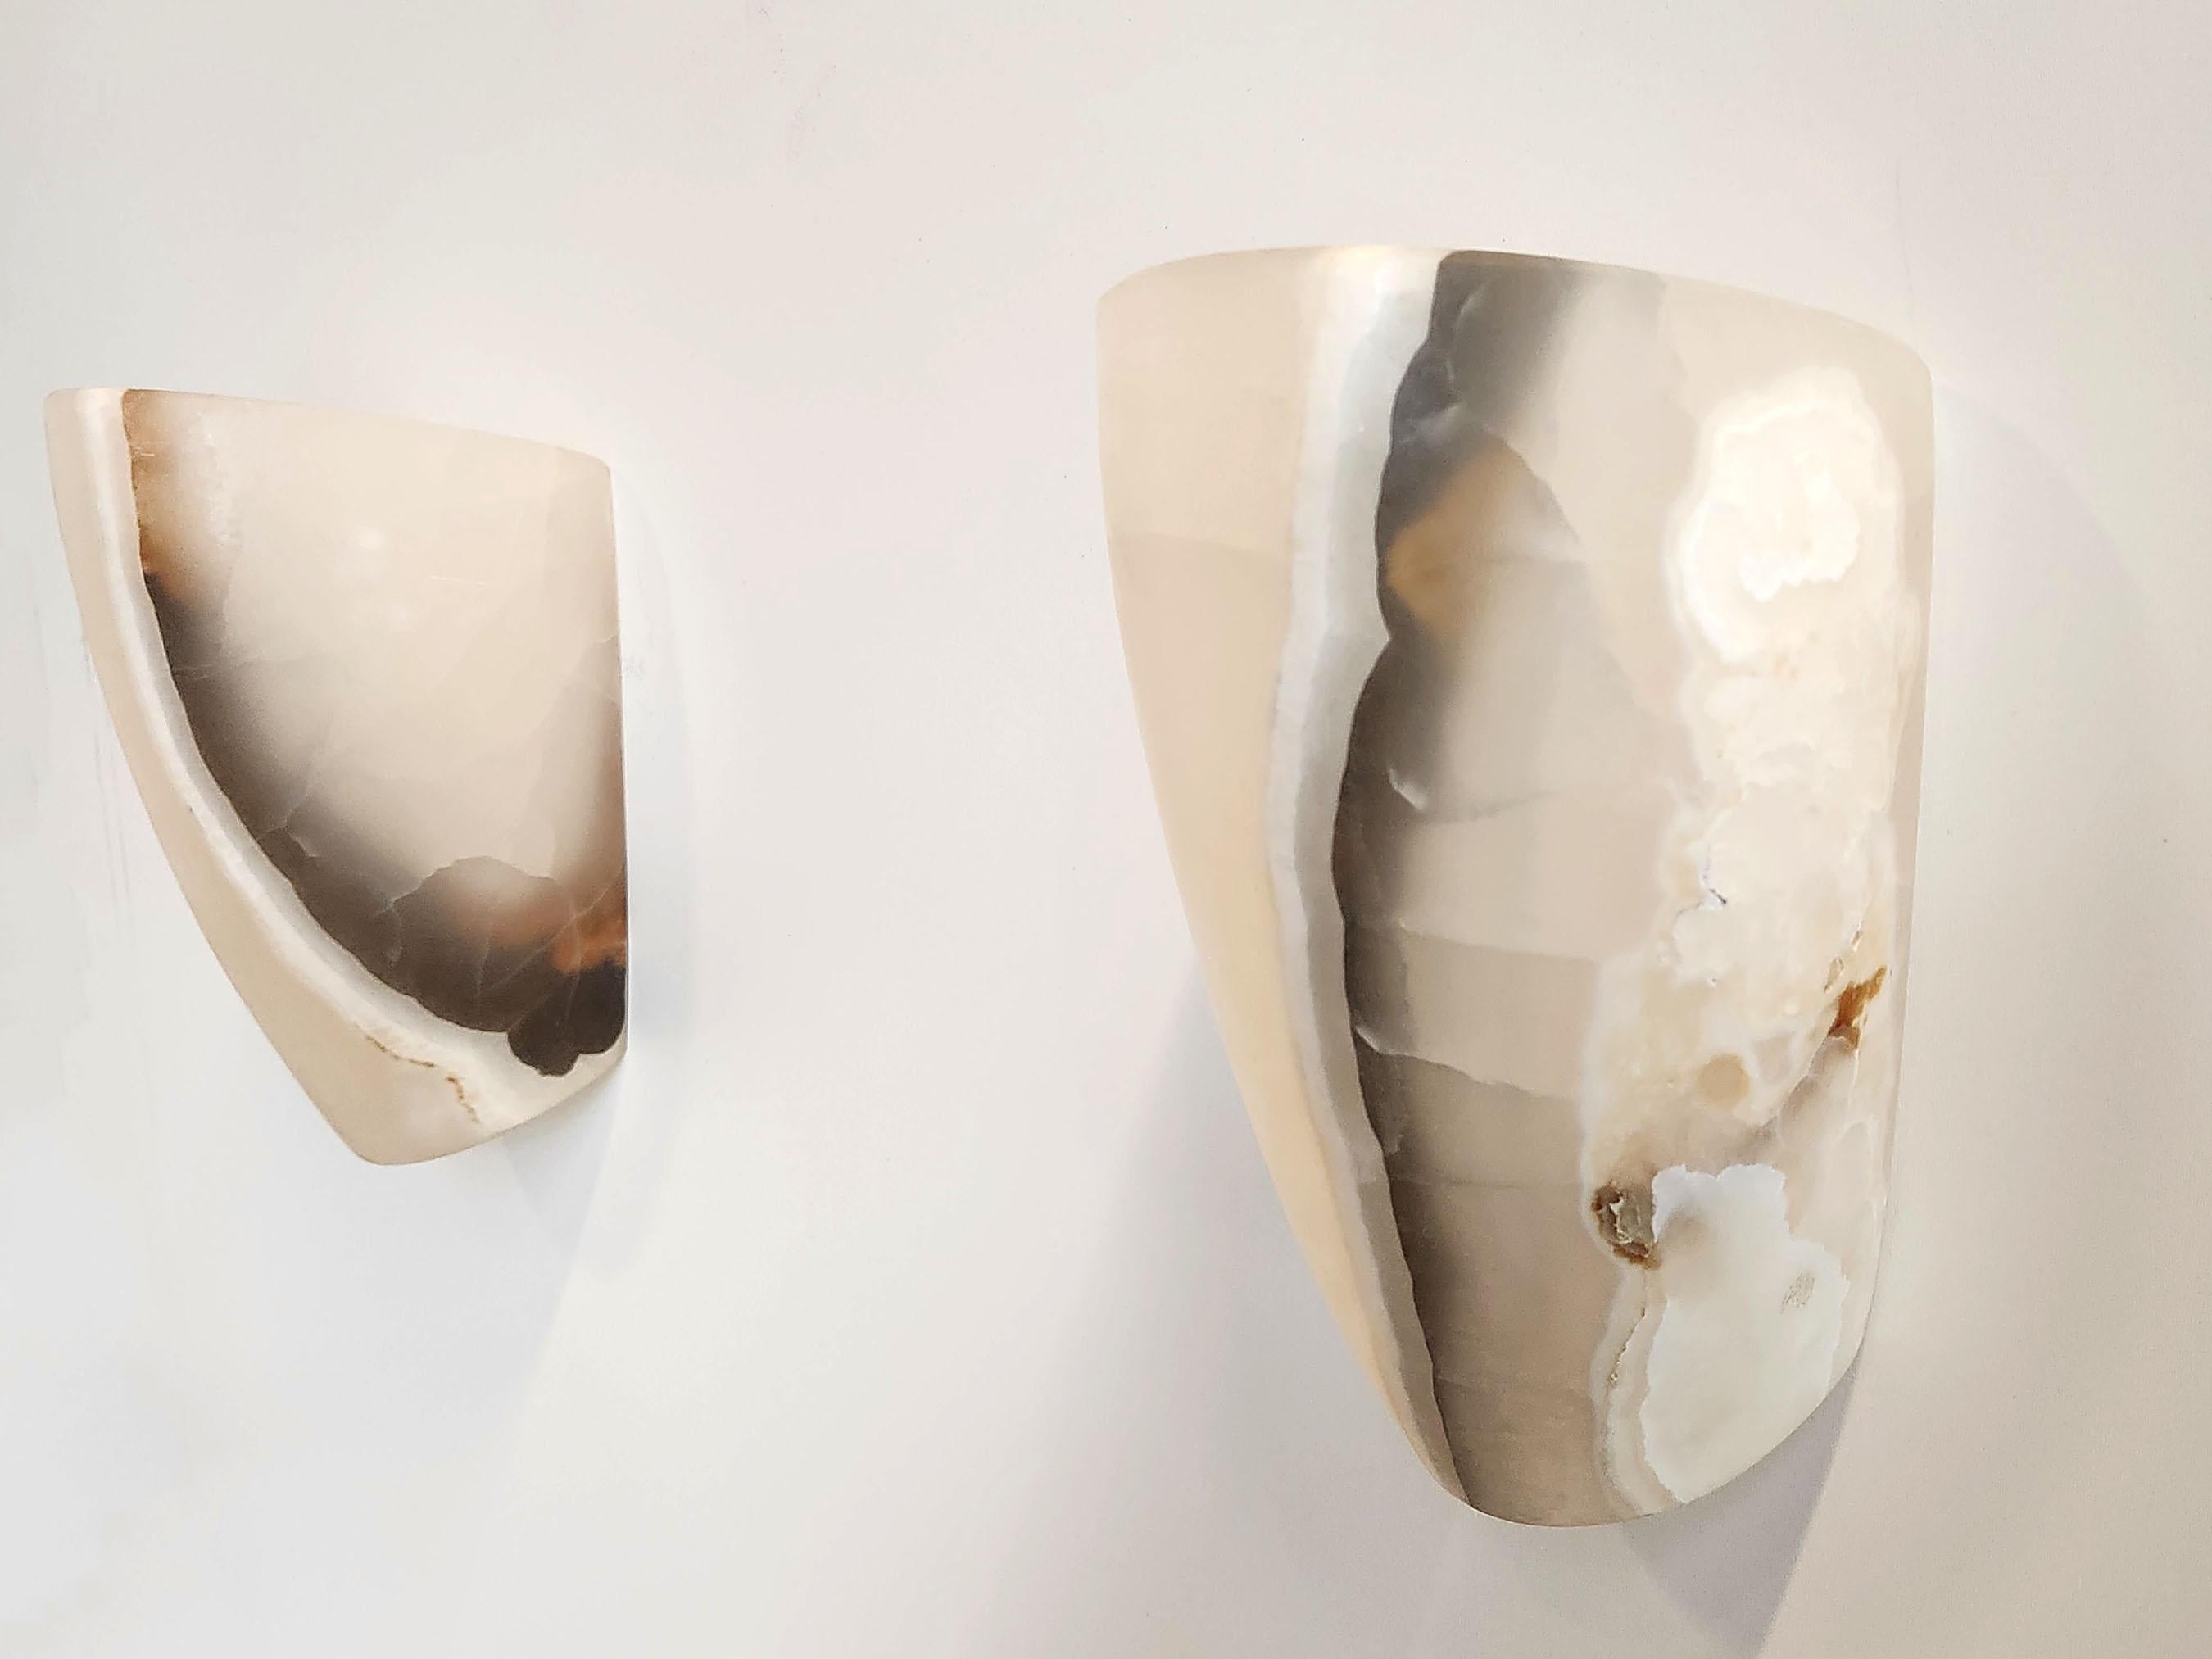 Hand-carved White Onyx Wall Sconces with Natural Dark Veins In New Condition For Sale In Stratford, CT